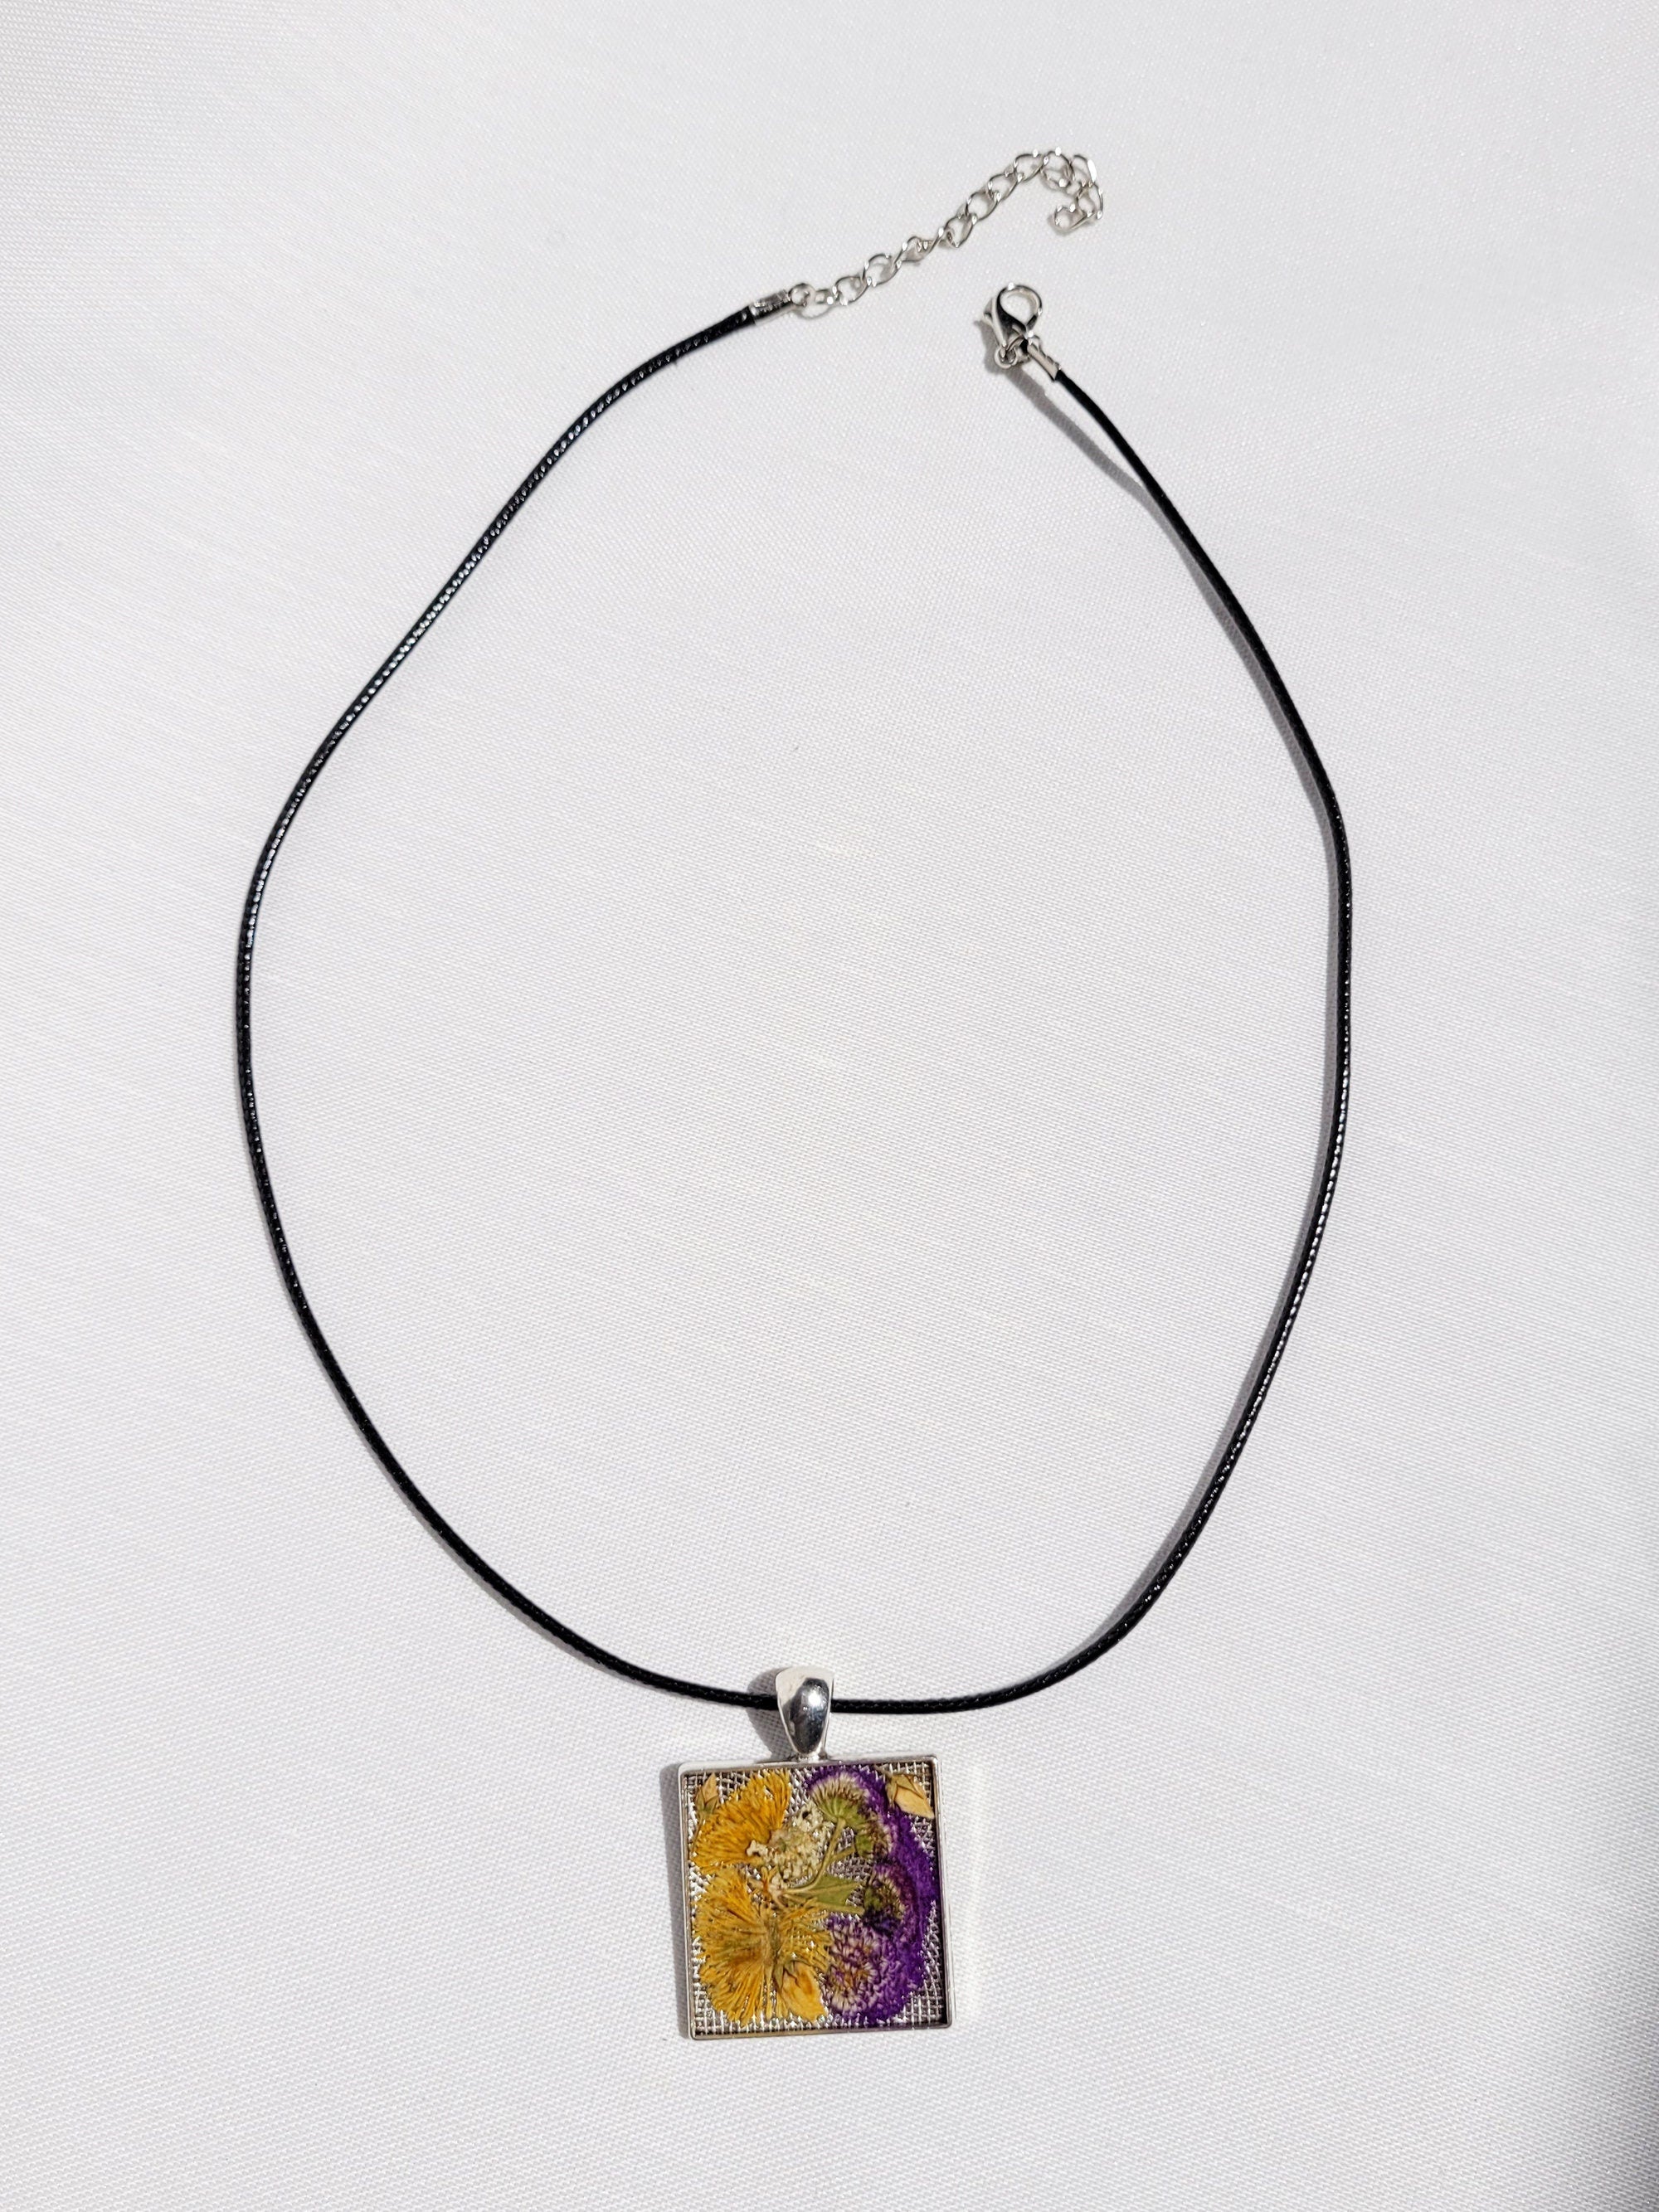 Dried flower resin square pendant necklace, Handmade pendant, pressed flower jewelry, floral herbarium collar,  S1